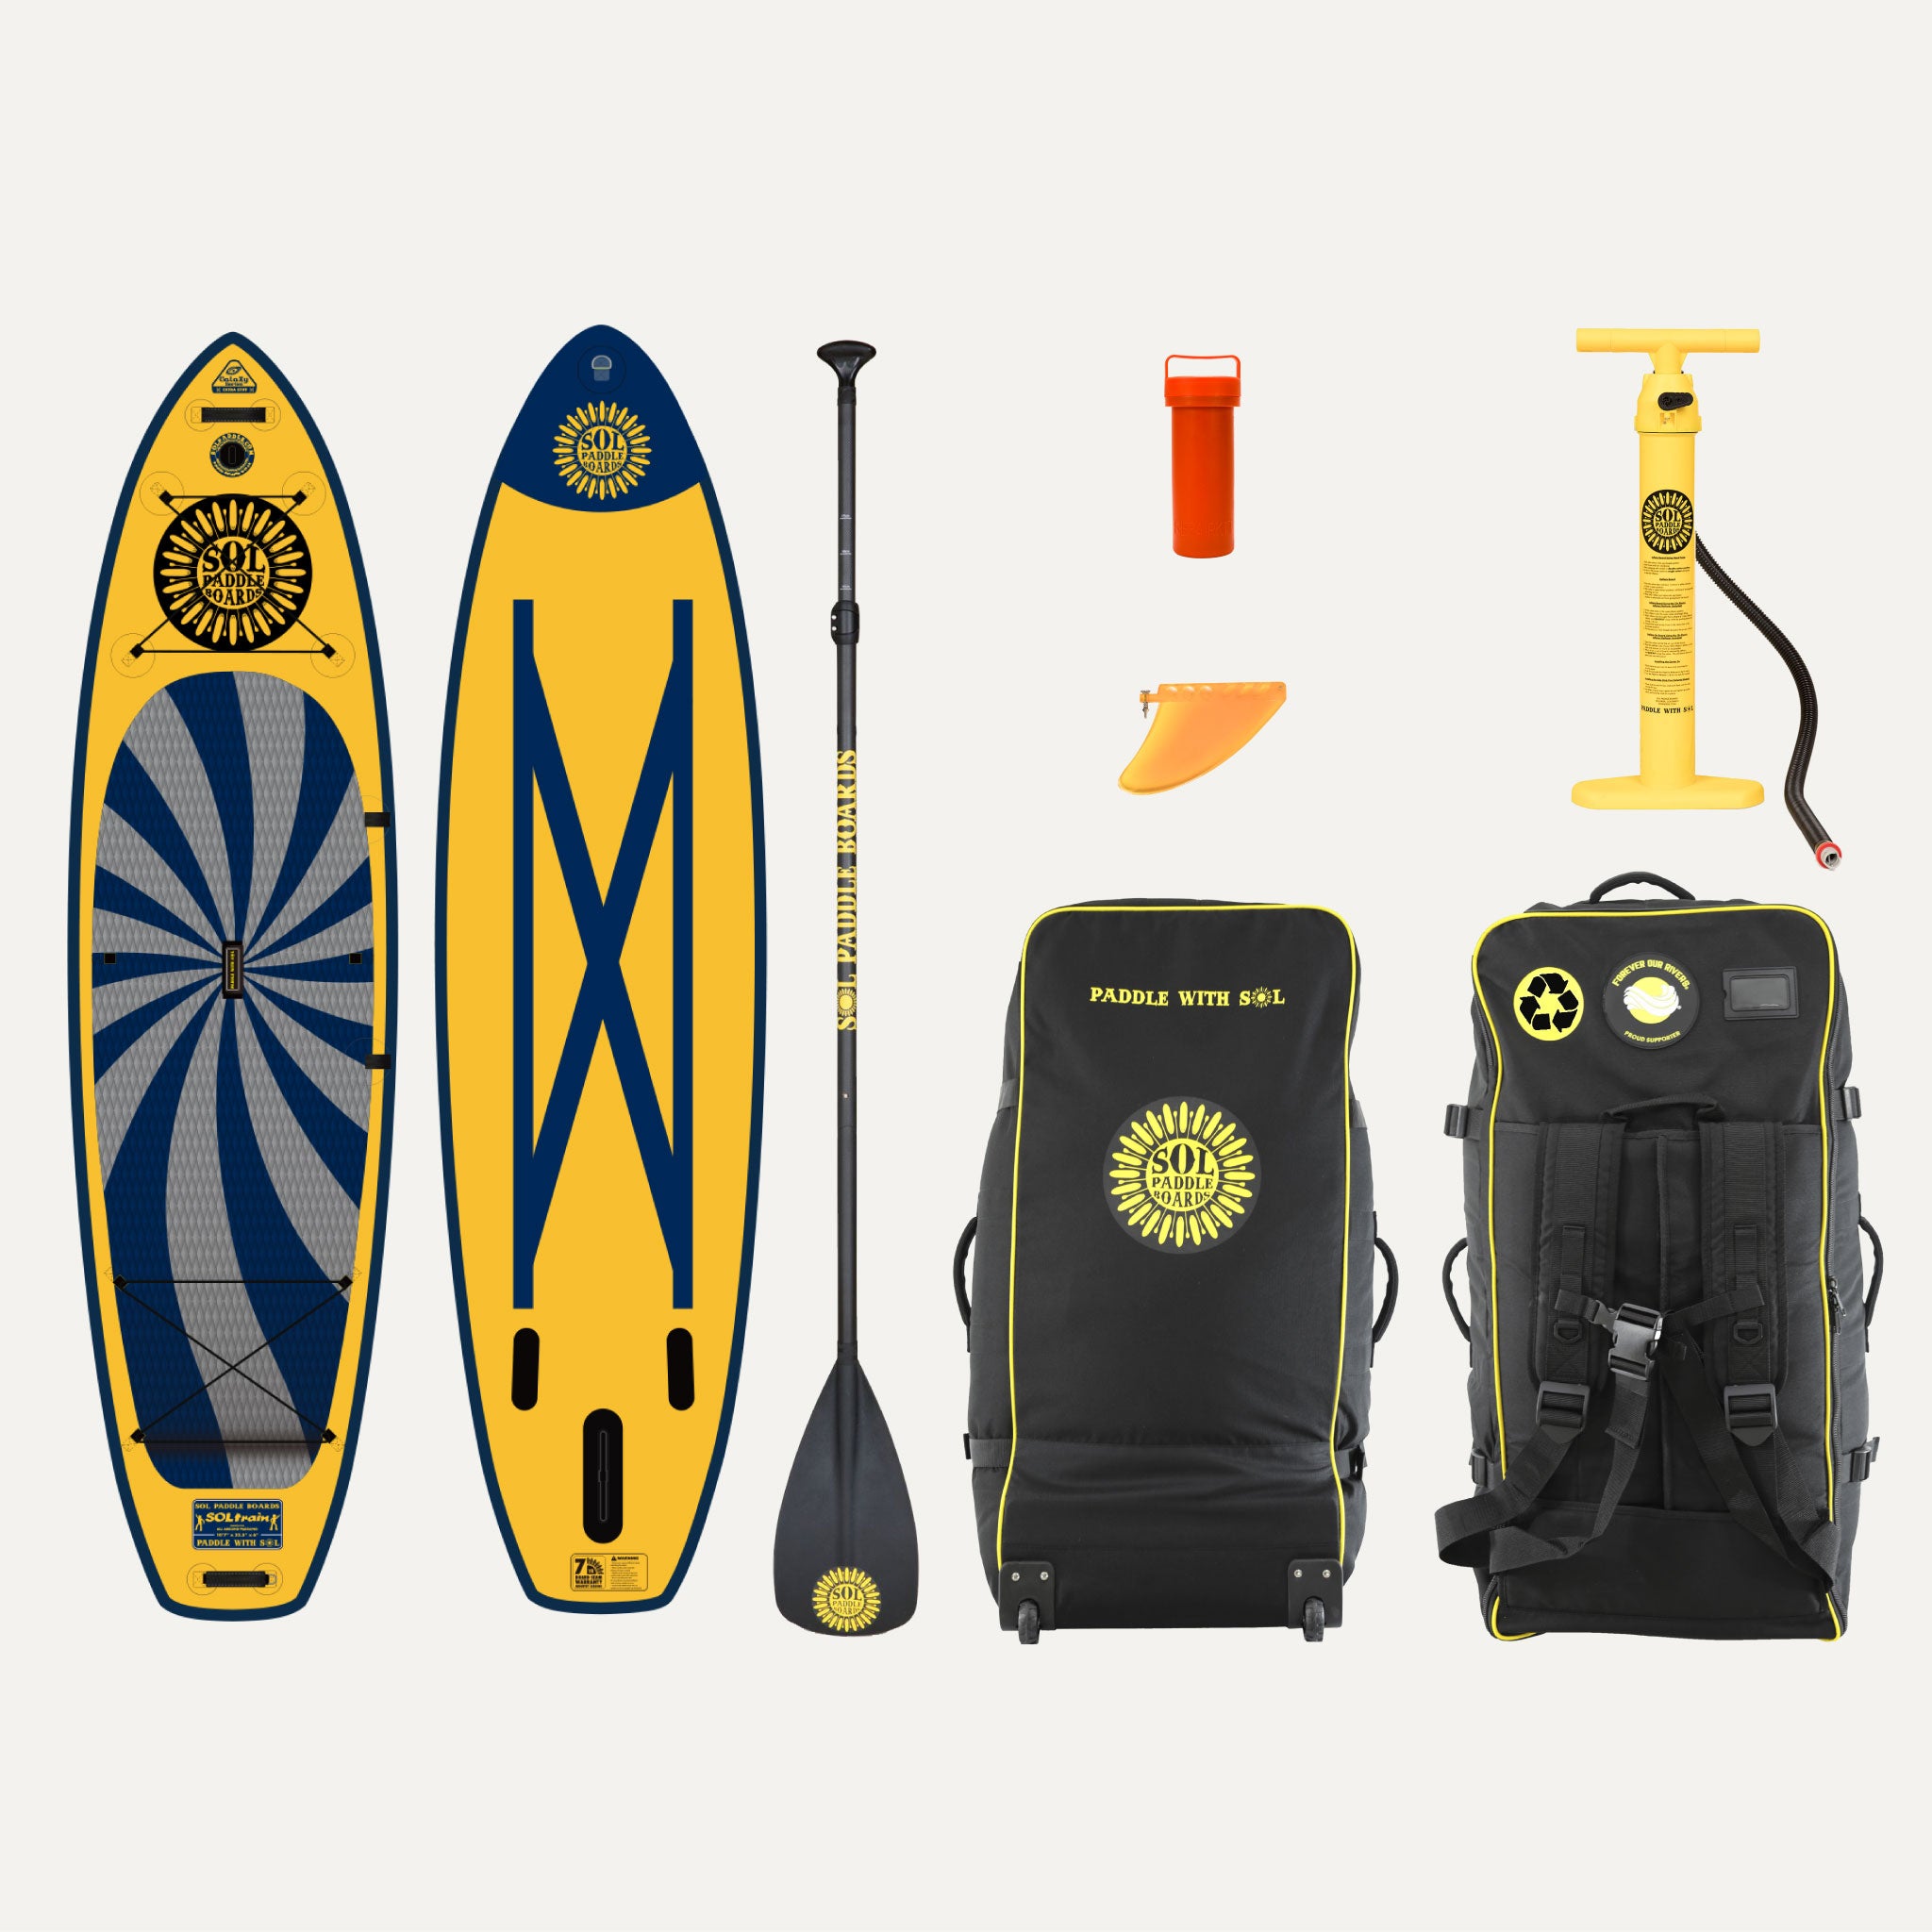 GalaXy SOLtrain Inflatable Paddle Board showcasing the top and bottom views of the SUP board and the accessories that come with it